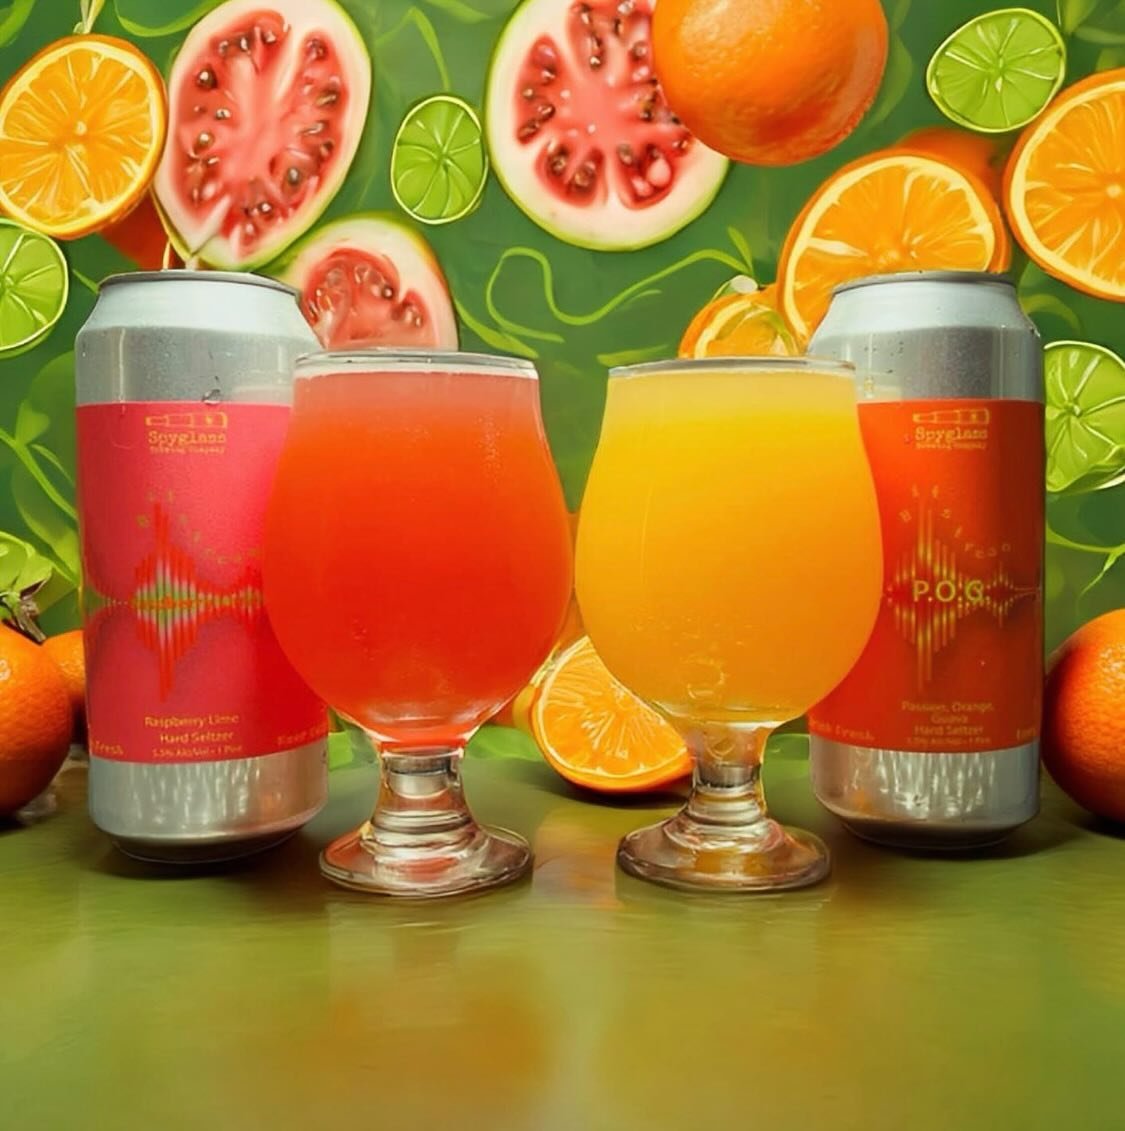 🍋&zwj;🟩Bitstream Fruited Hard Seltzers!🍊

We have currently have 2 Fruited Hard Seltzers both are 5.5% ABV - on draft and in cans togo! 

Raspberry Lime - tart, refreshing, and lime forward. A bit puckering event but SO so good. 🍋&zwj;🟩
&amp; 
P